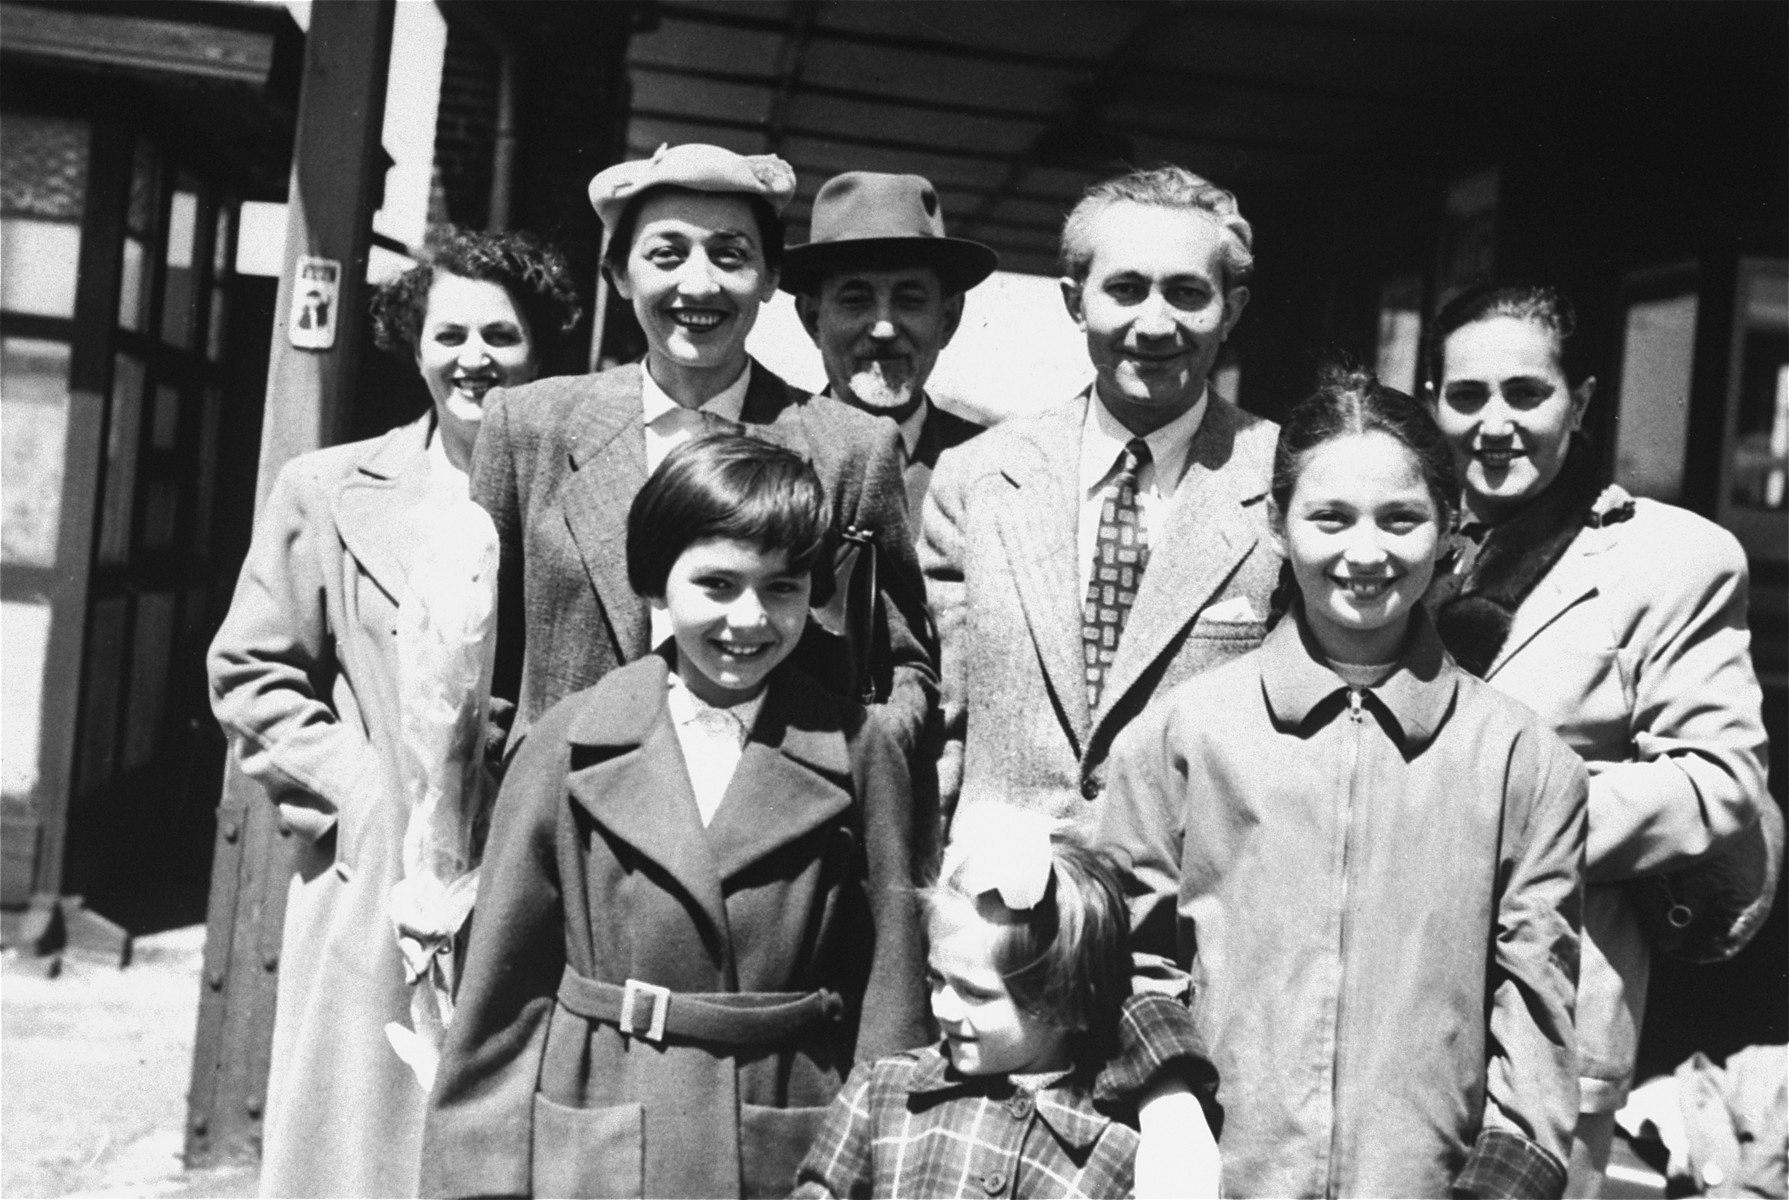 Group portrait of the Ament family at the train station in Antwerp prior to their departure for the United States.

Pictured are: First row, left to right are Jeanine Ament , Eleonore Ament and Miriam Matzner.  Back row (left to right):  Paula  Ament Schwalb, Mania Ament, Chaim-Shia Ament, Marian Ament and Rosia Ament Molkner.